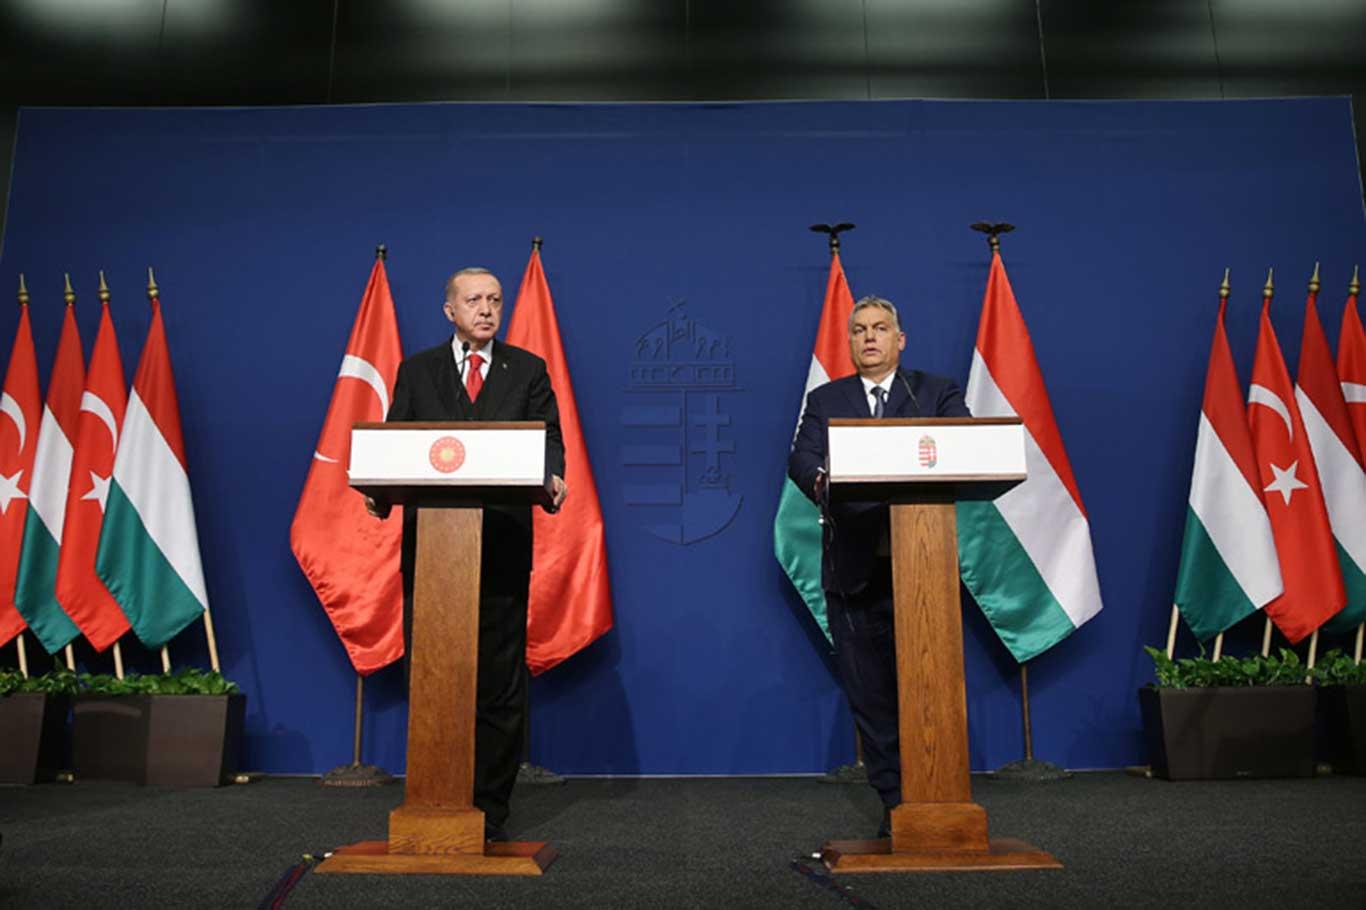 Erdoğan: We have an exemplary cooperation with Hungary